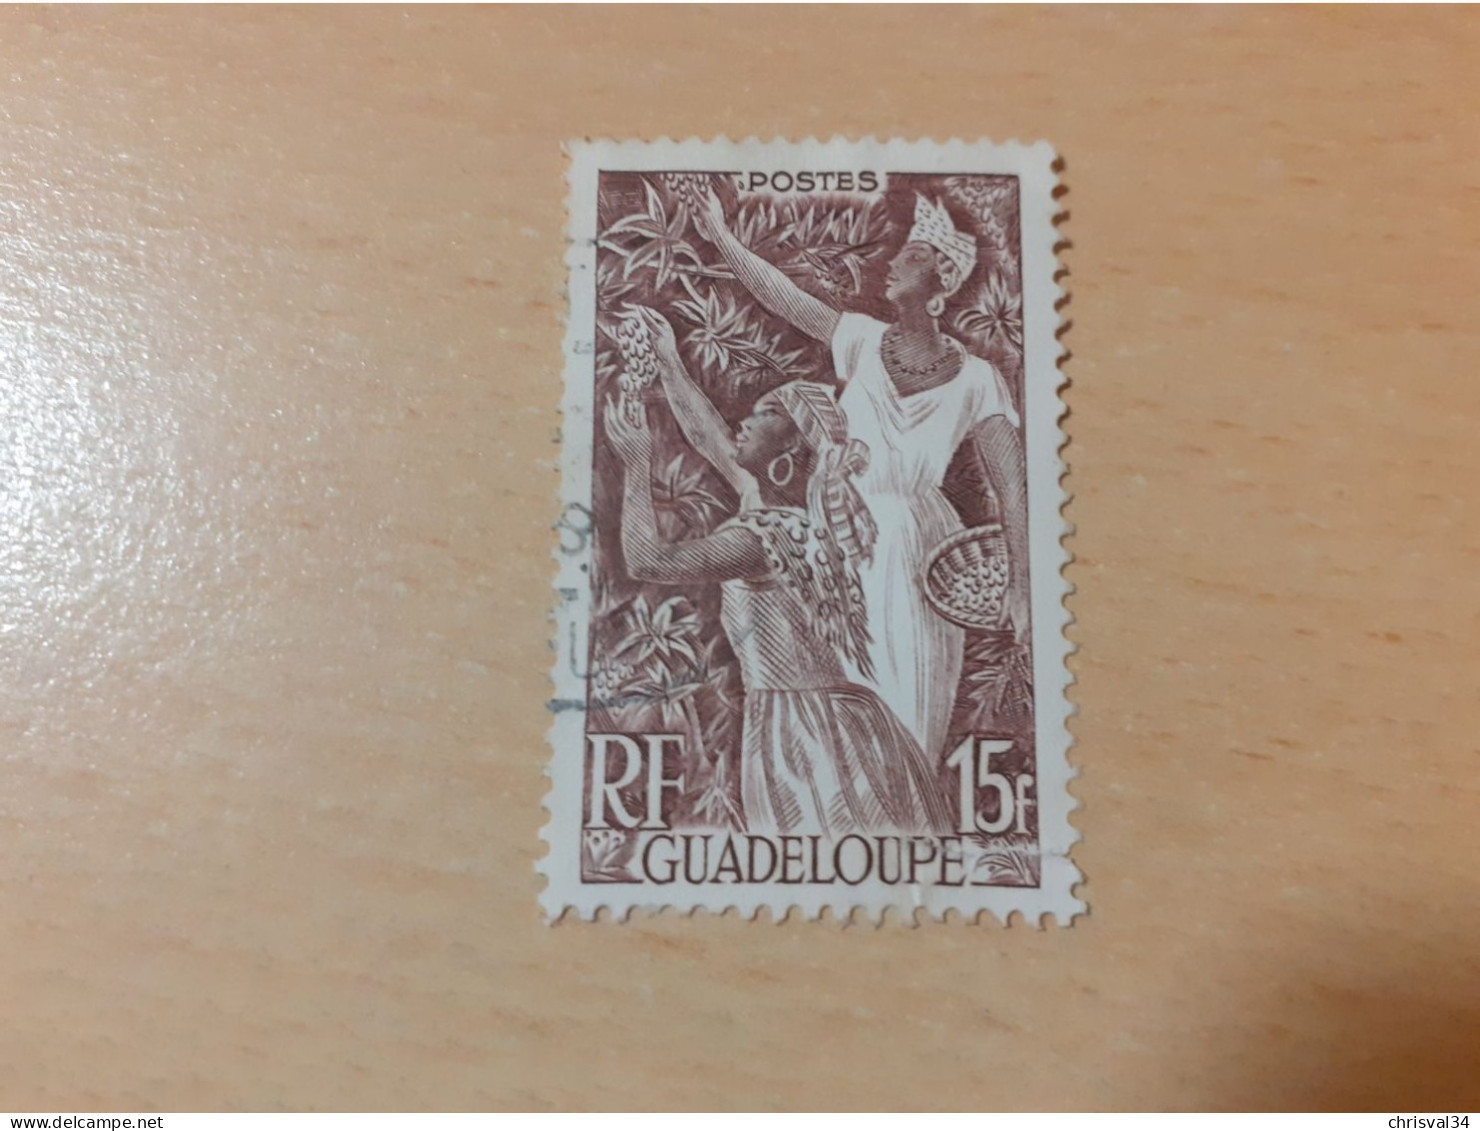 TIMBRE   GUADELOUPE       N  210    COTE  1,50   EUROS  OBLITERE - Gebruikt